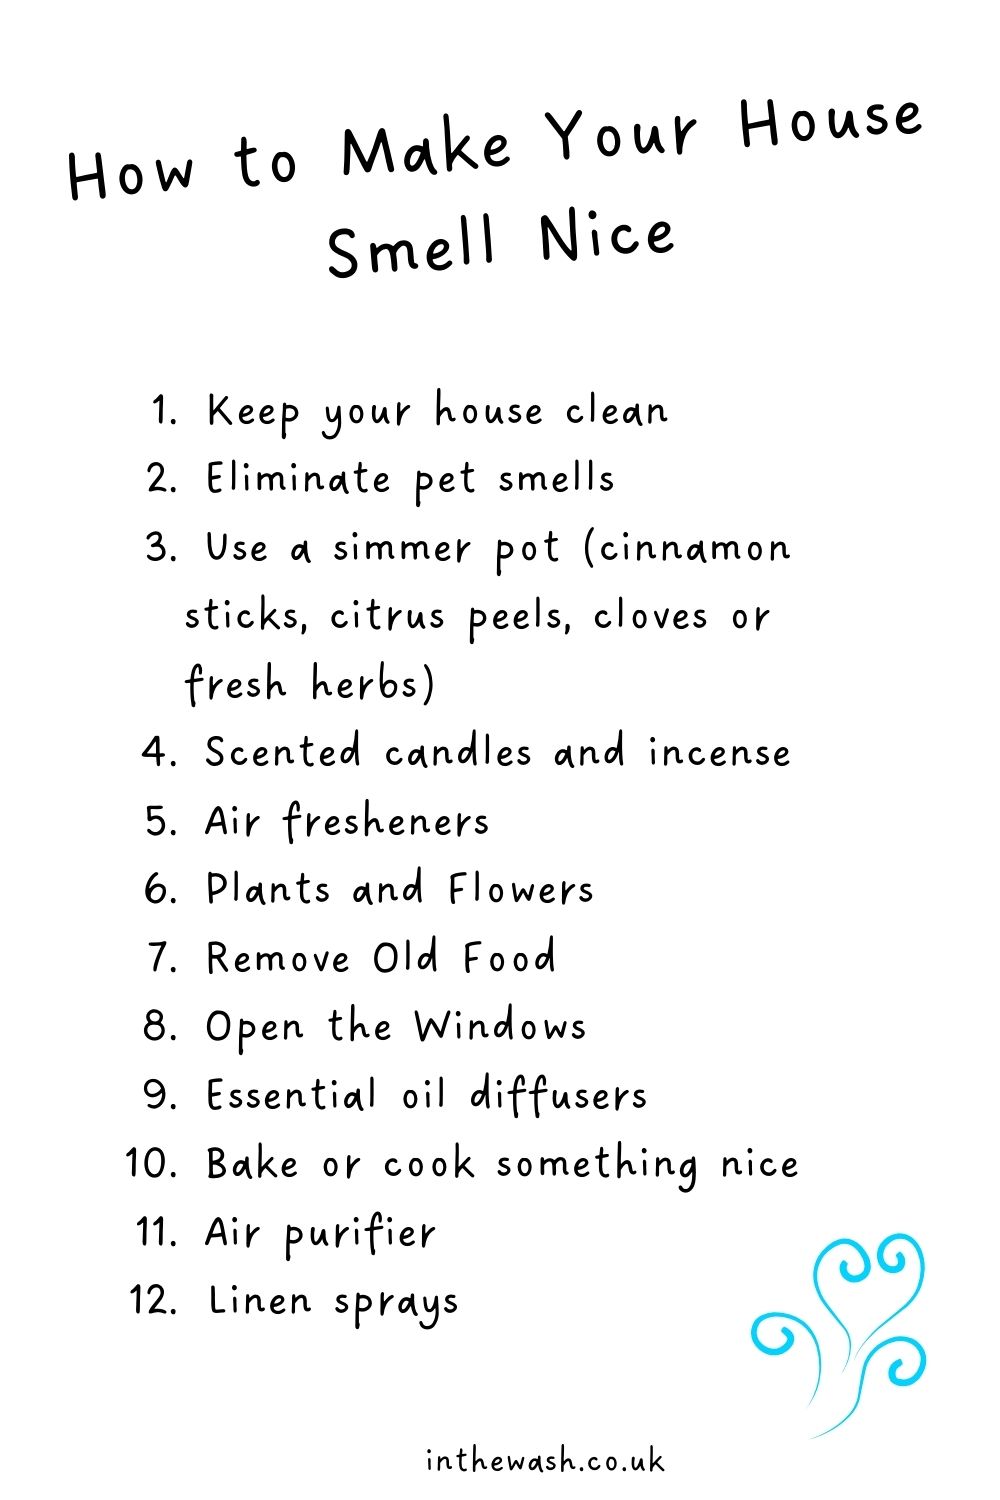 How to Make Your House Smell Nice